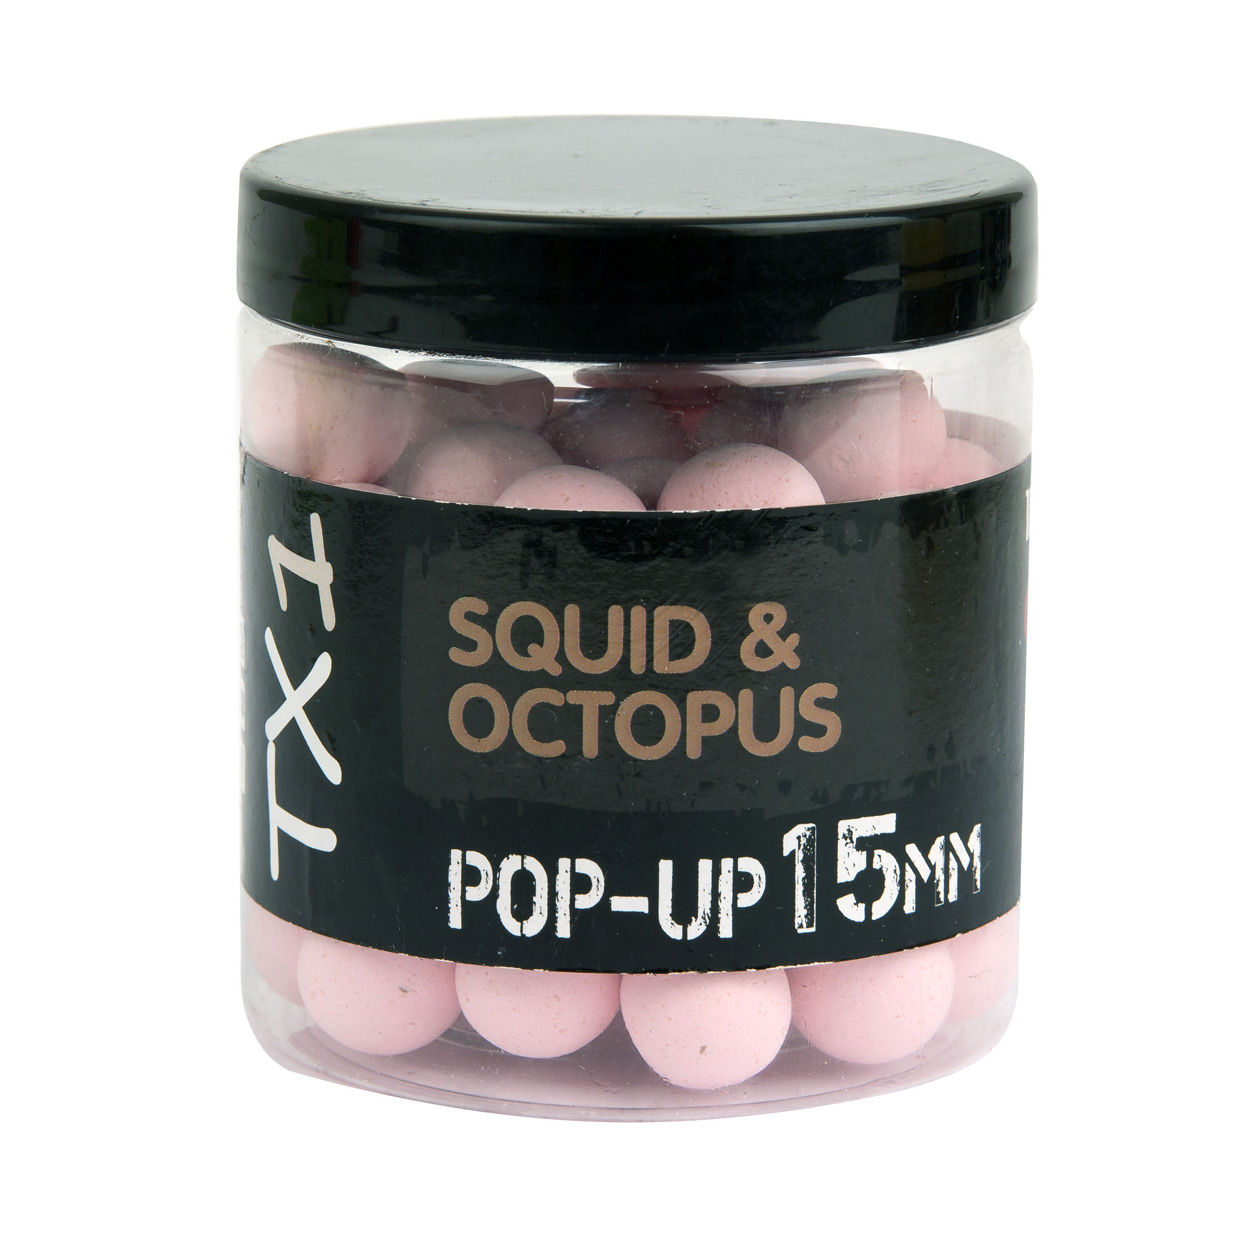 Shimano TX1 Pop-Up Squid & Octopus Washed Out Pink 15mm (100g)